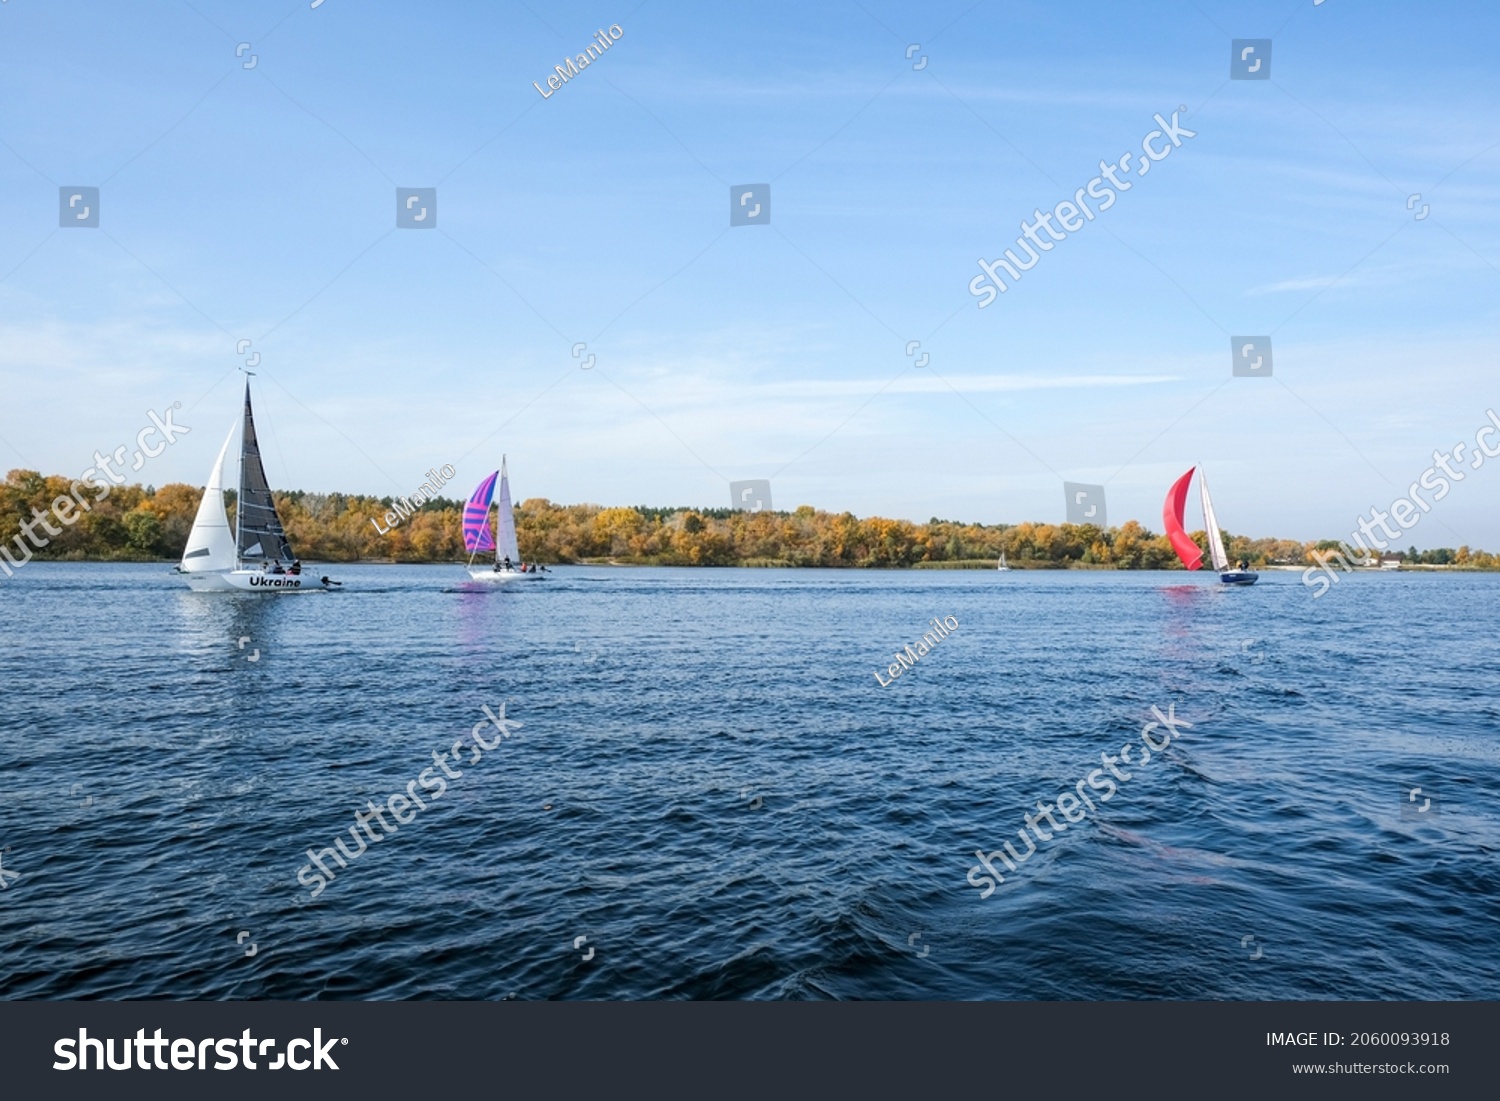 Sailing yachts with colored sails in pursuit race, side view #2060093918